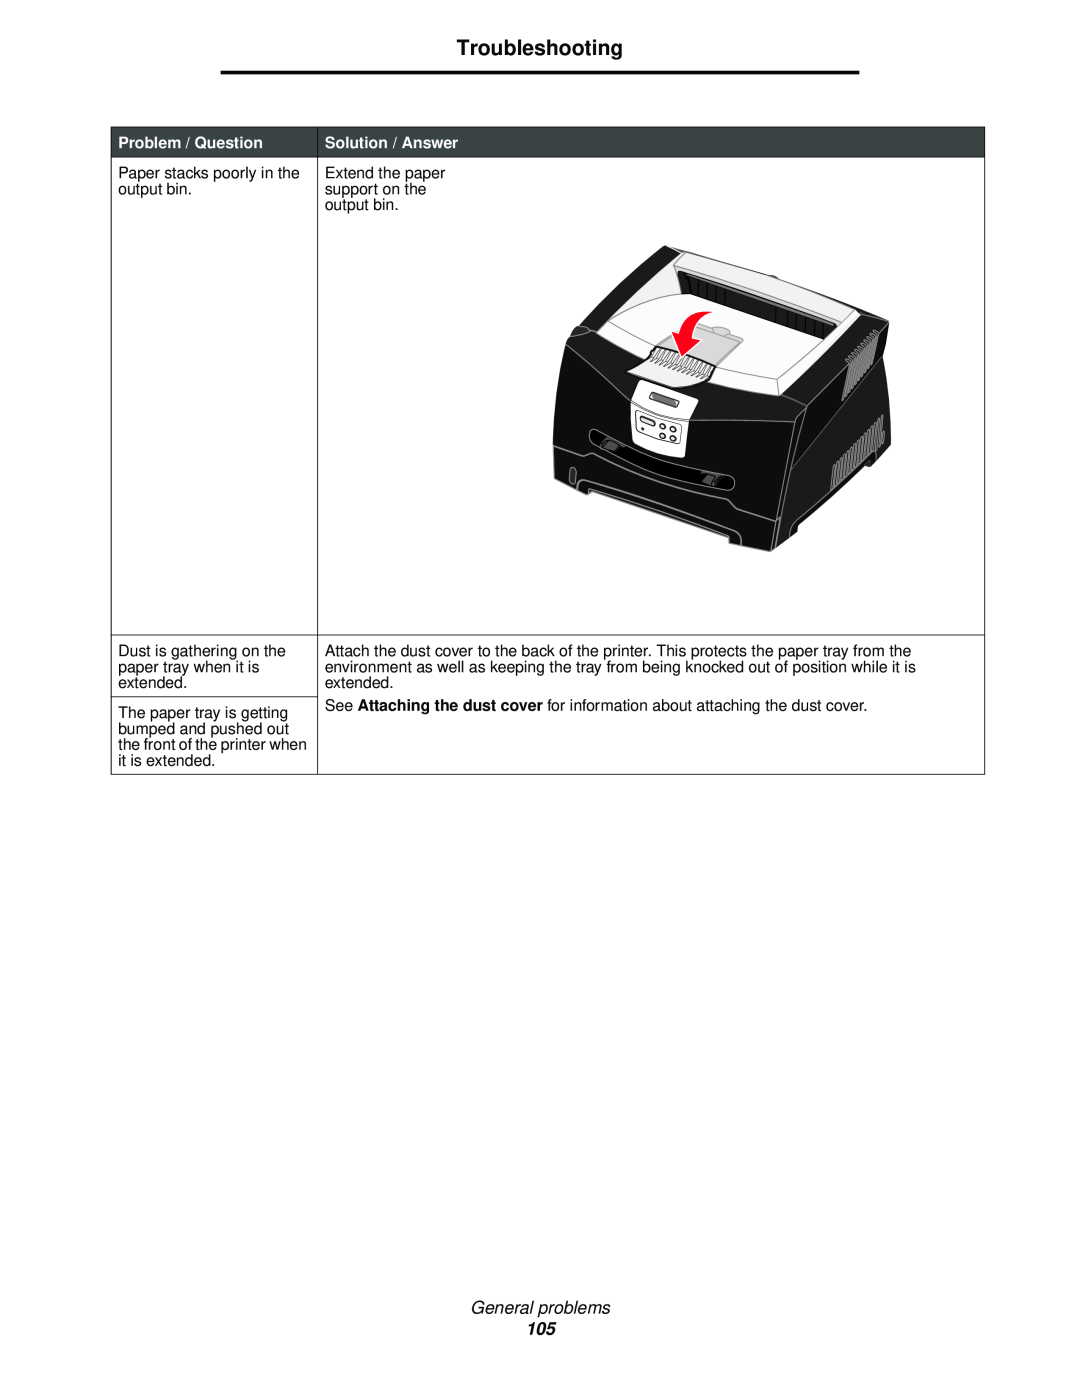 Lexmark 340, 342n manual Troubleshooting, General problems, Problem / Question, Solution / Answer 